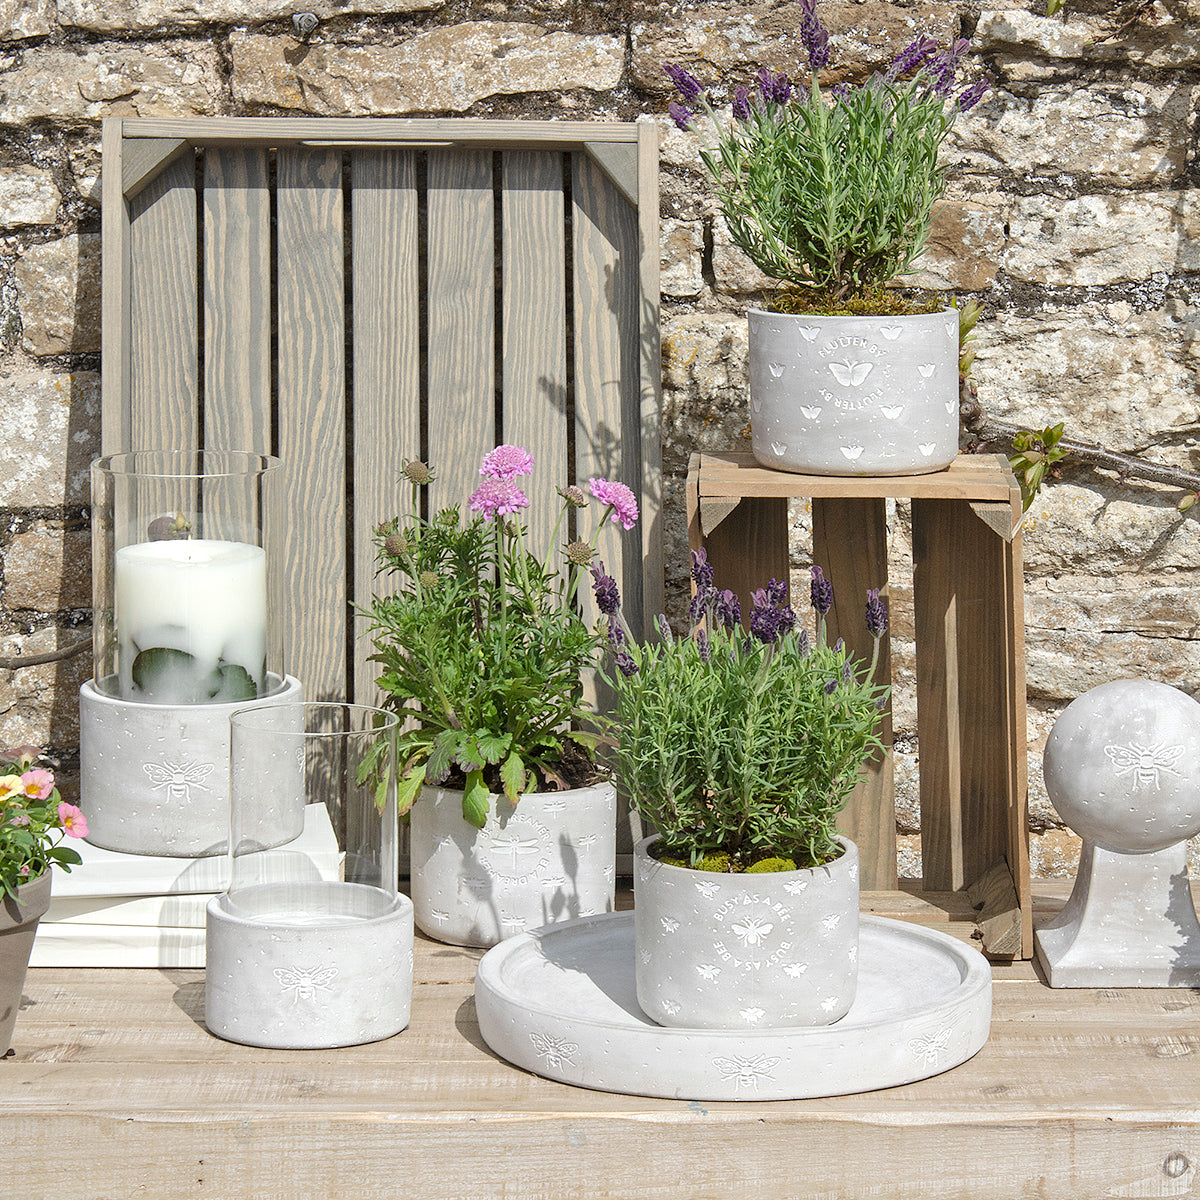 As seen on Alan Titchmarsh: Spring into Summer